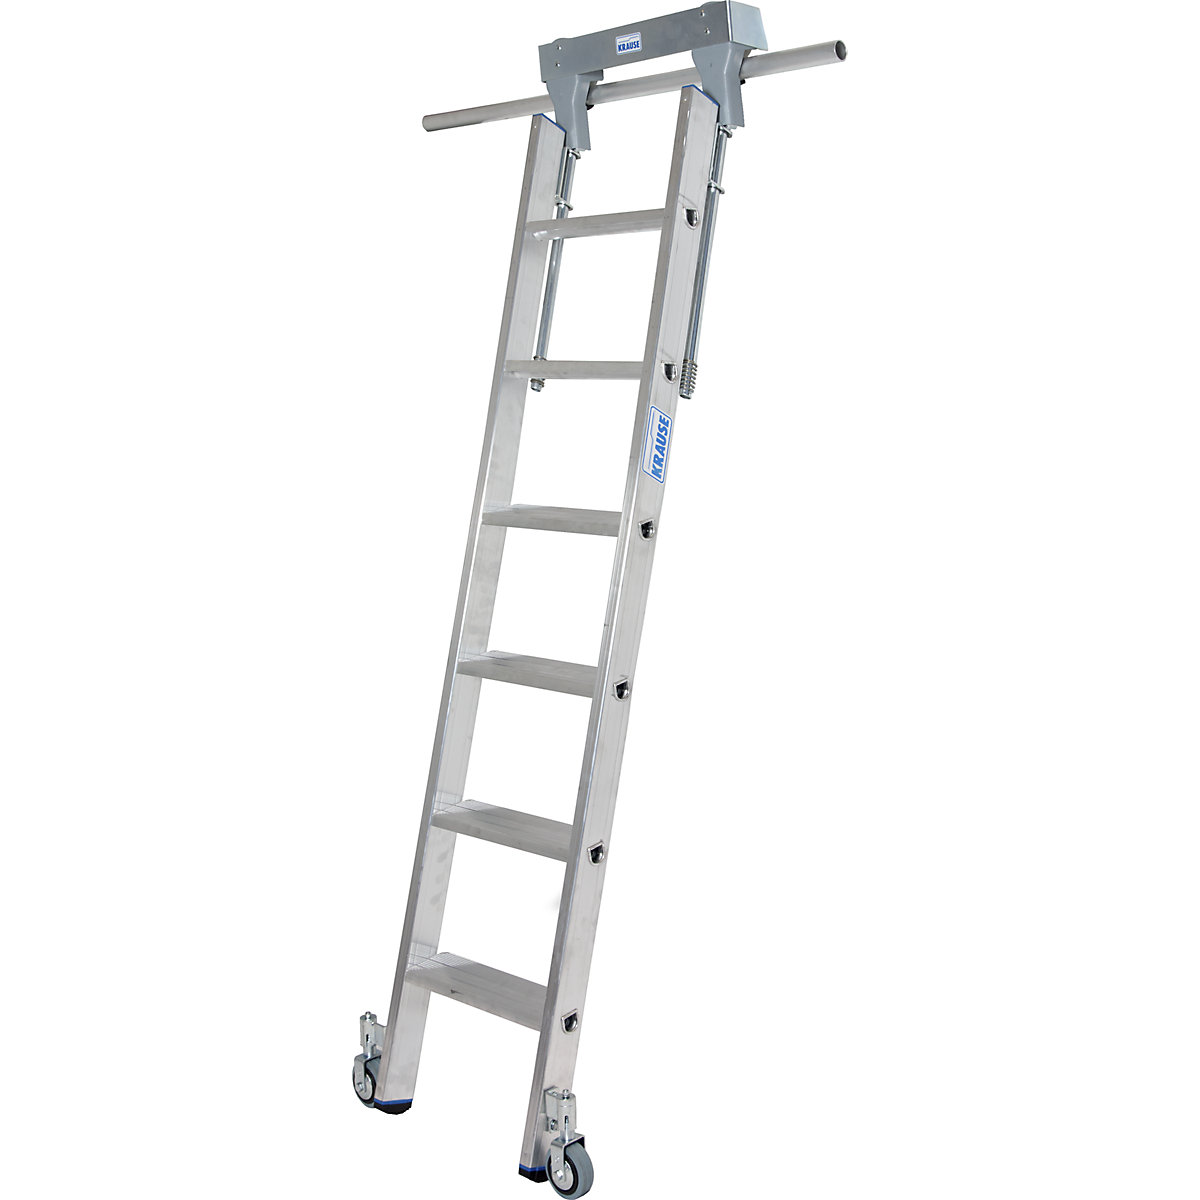 KRAUSE – Step shelf ladder, with wheels on top for round tubing rail system, 6 steps